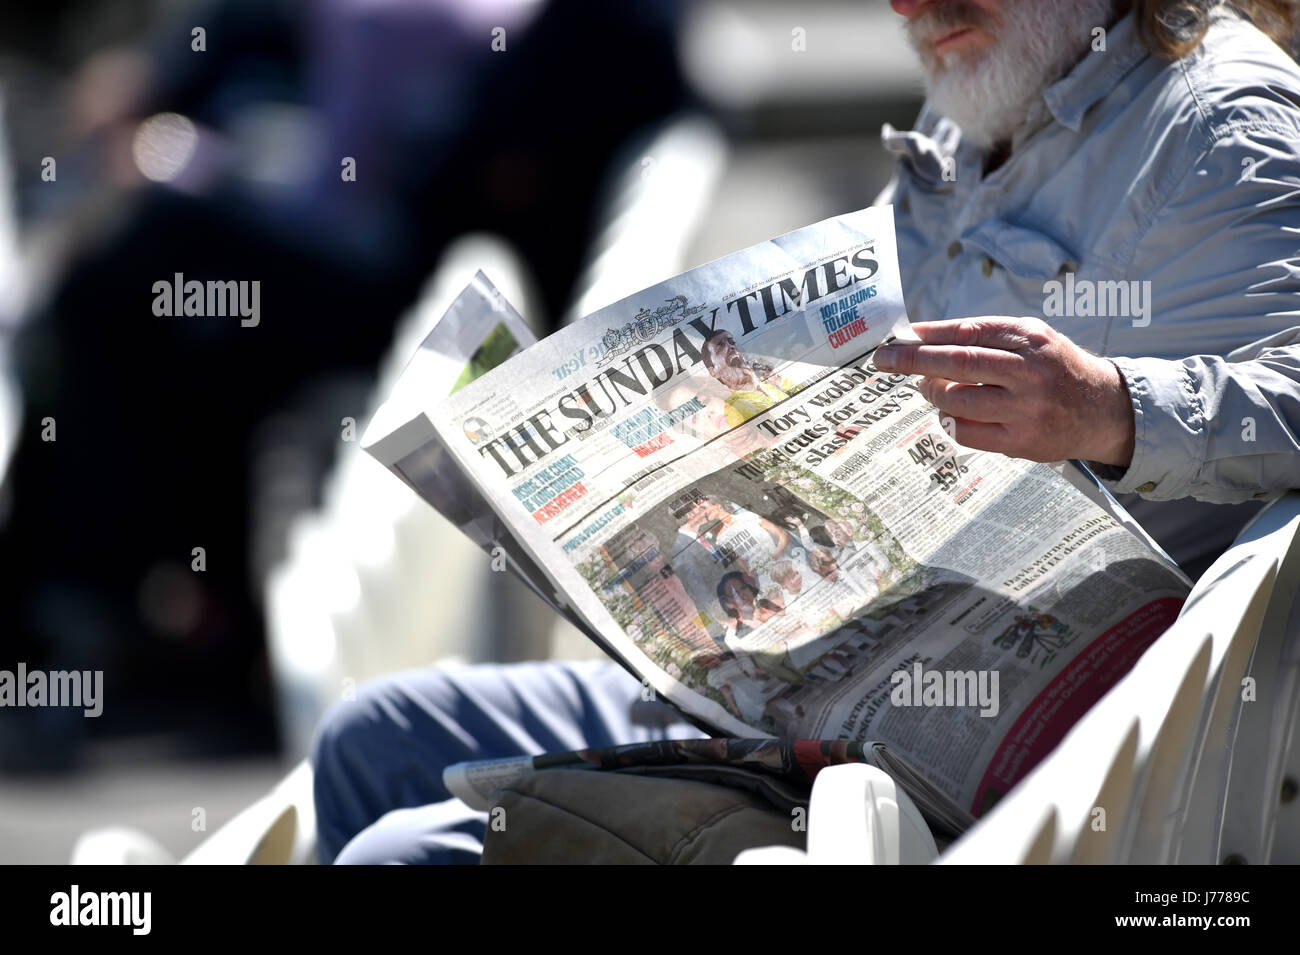 Man reading the Sunday Times newspaper Stock Photo